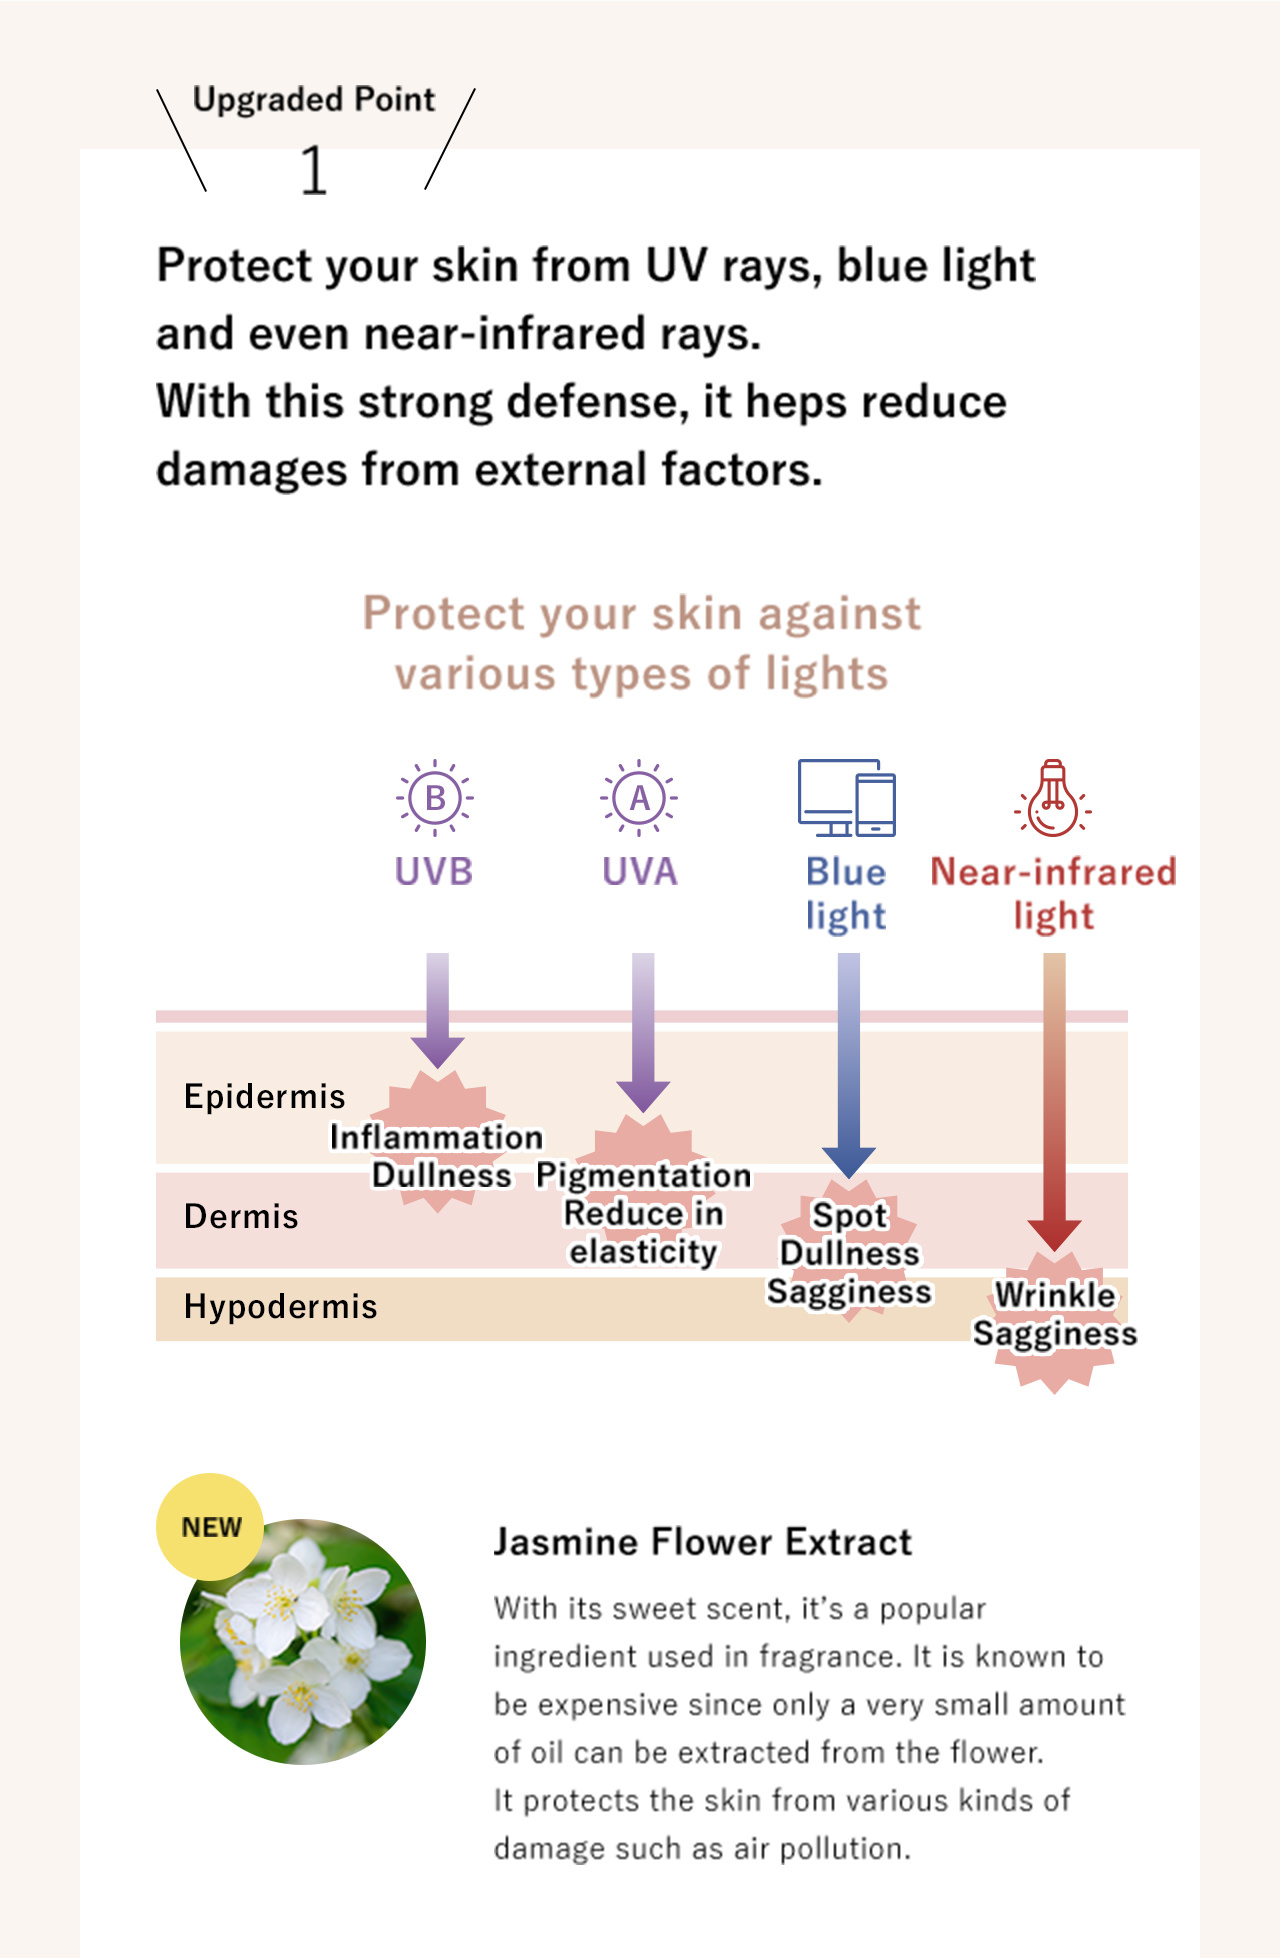 Upgraded Point 1: Protect your skin from UV rays, blue light and even near-infrared rays. With this strong defense, it heps reduce damages from external factors.